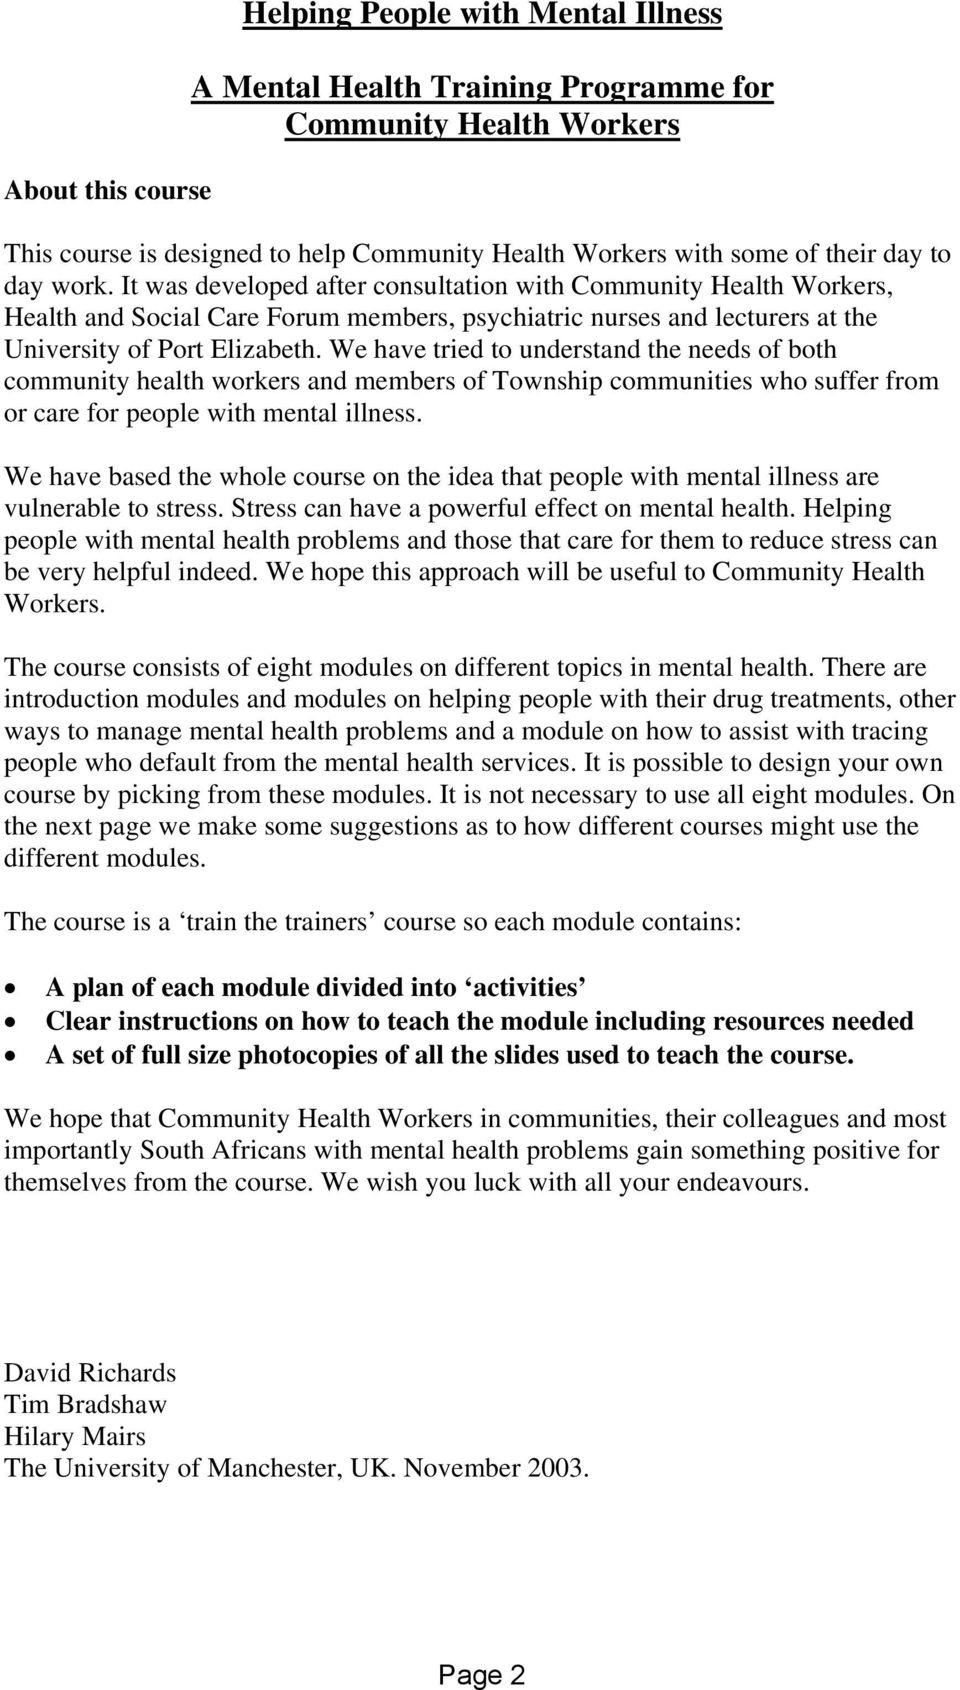 We have tried to understand the needs of both community health workers and members of Township communities who suffer from or care for people with mental illness.